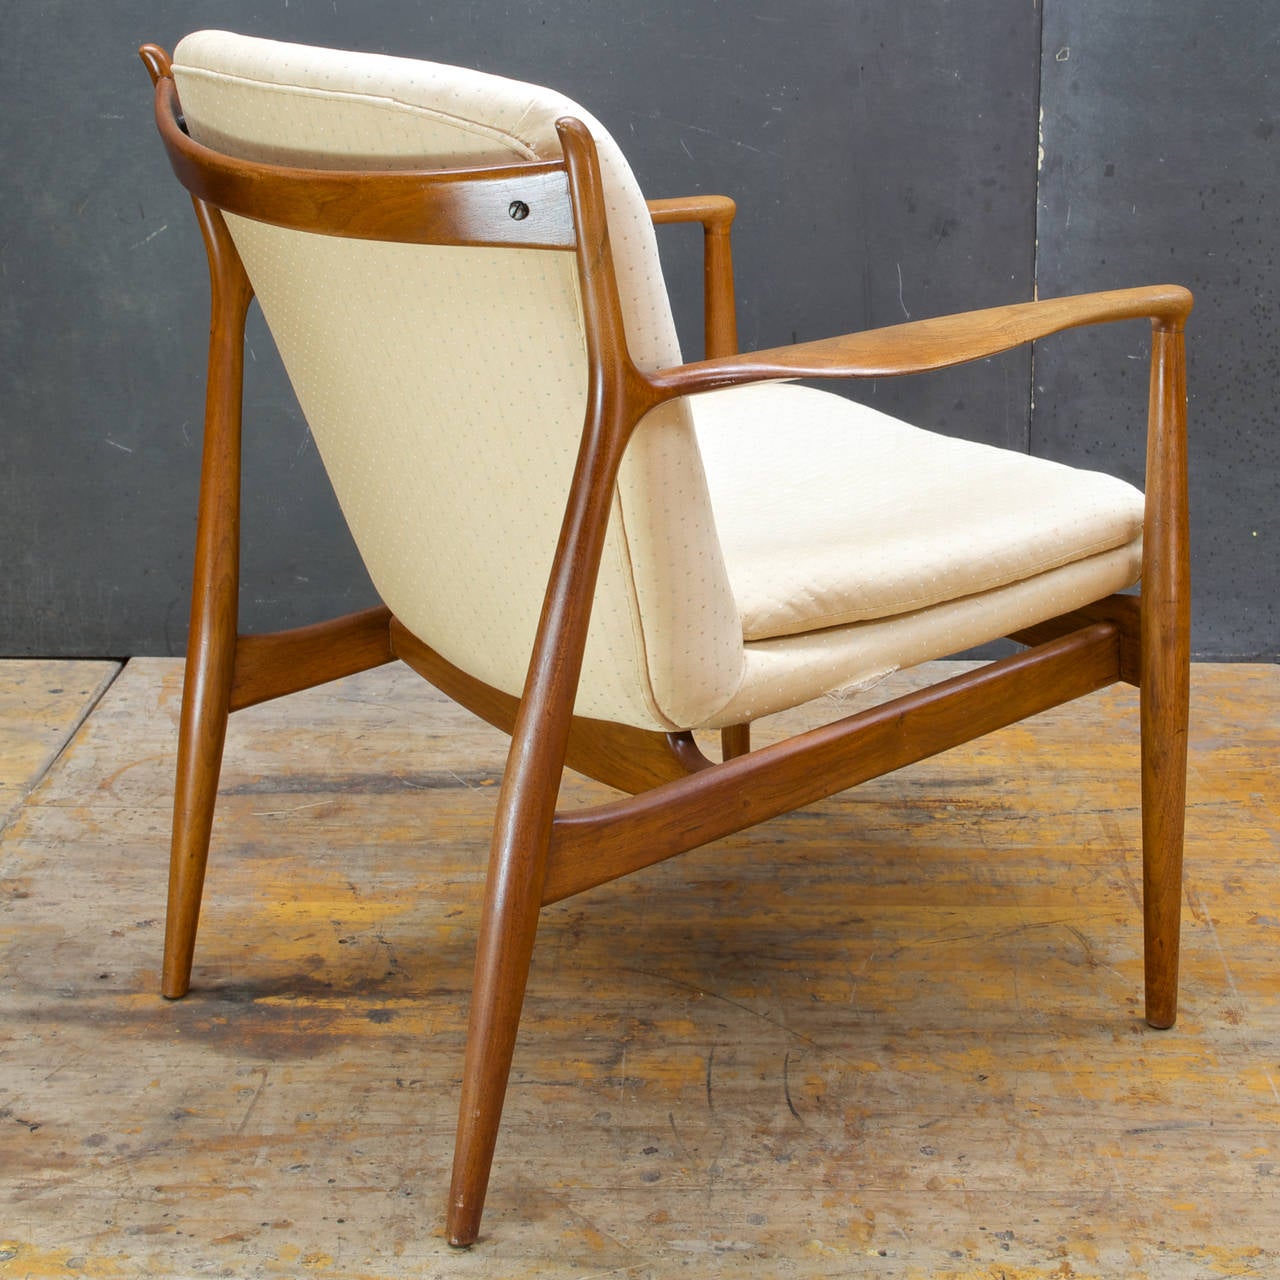 Rare and collectible (Never Reproduced) chair design by Finn Juhl. In the original upholstery with original seat pillow.